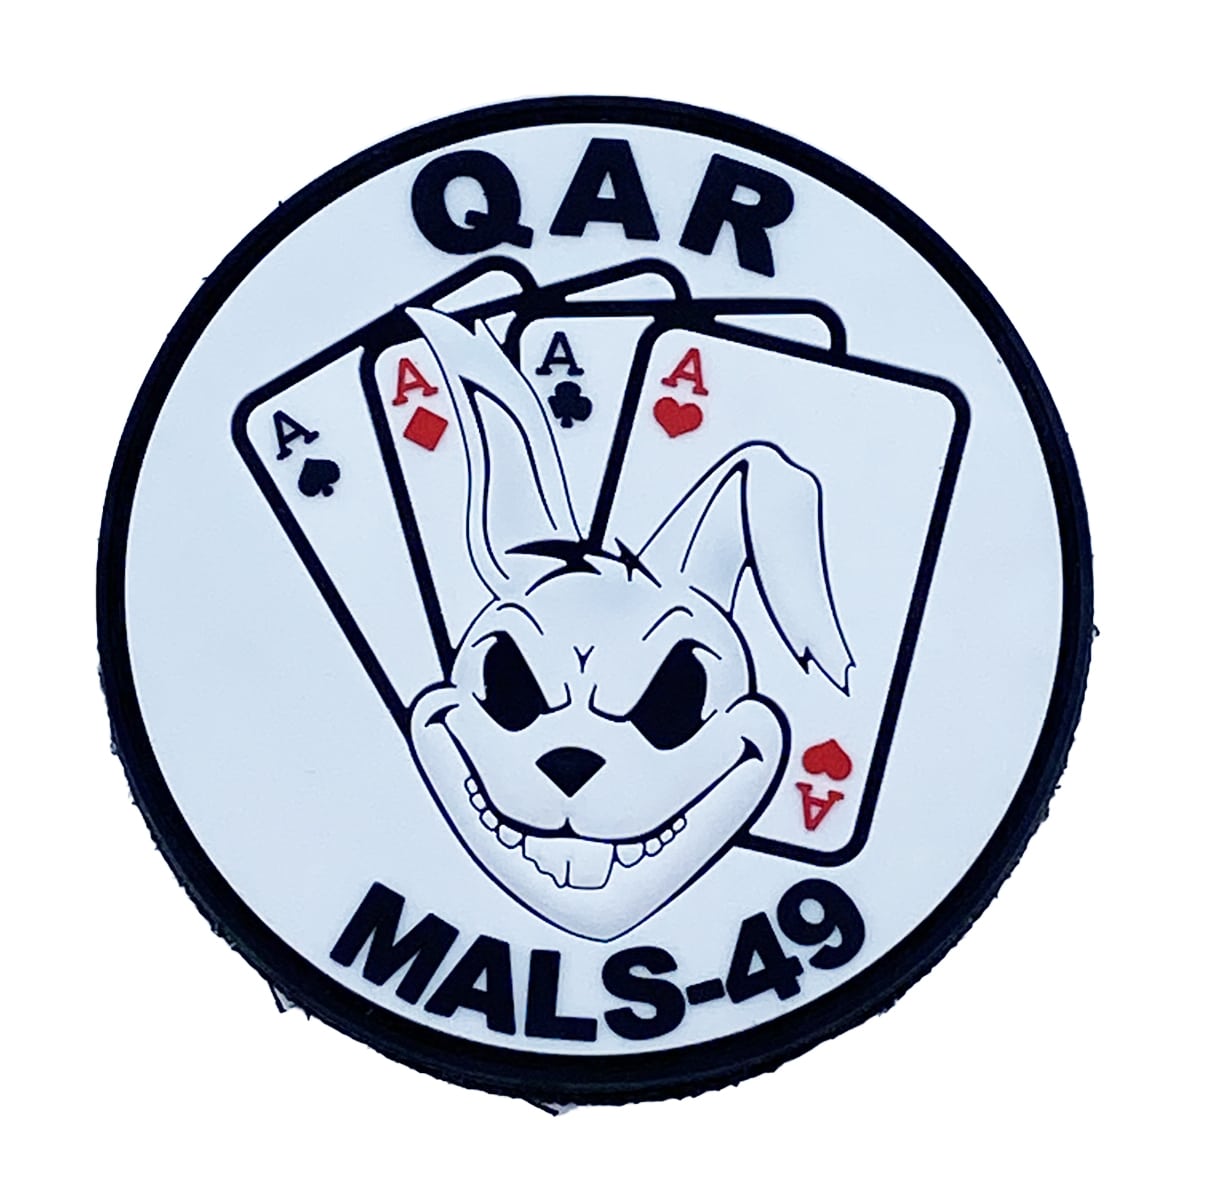 MALS-49 Magicians QAR PVC Patch - With Hook and Loop